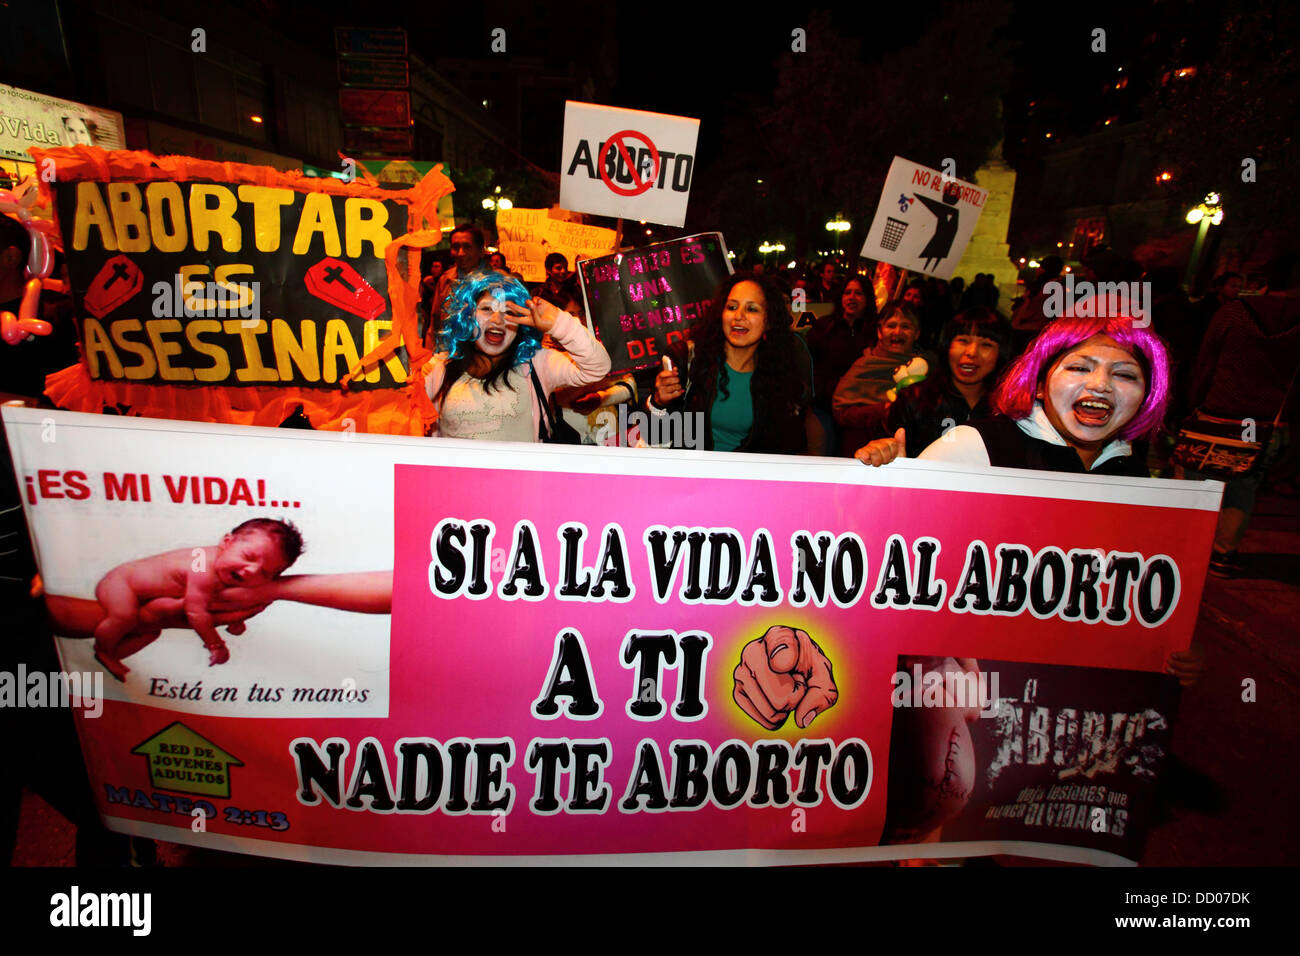 LA PAZ, BOLIVIA, 22nd August 2013. People take part in a march organised by the Red Pro-Vida (Pro Life Network) to protest against decriminalising abortion. Bolivia has been debating whether to decriminalise abortion since March 2012.  Credit:  James Brunker / Alamy Live News Stock Photo